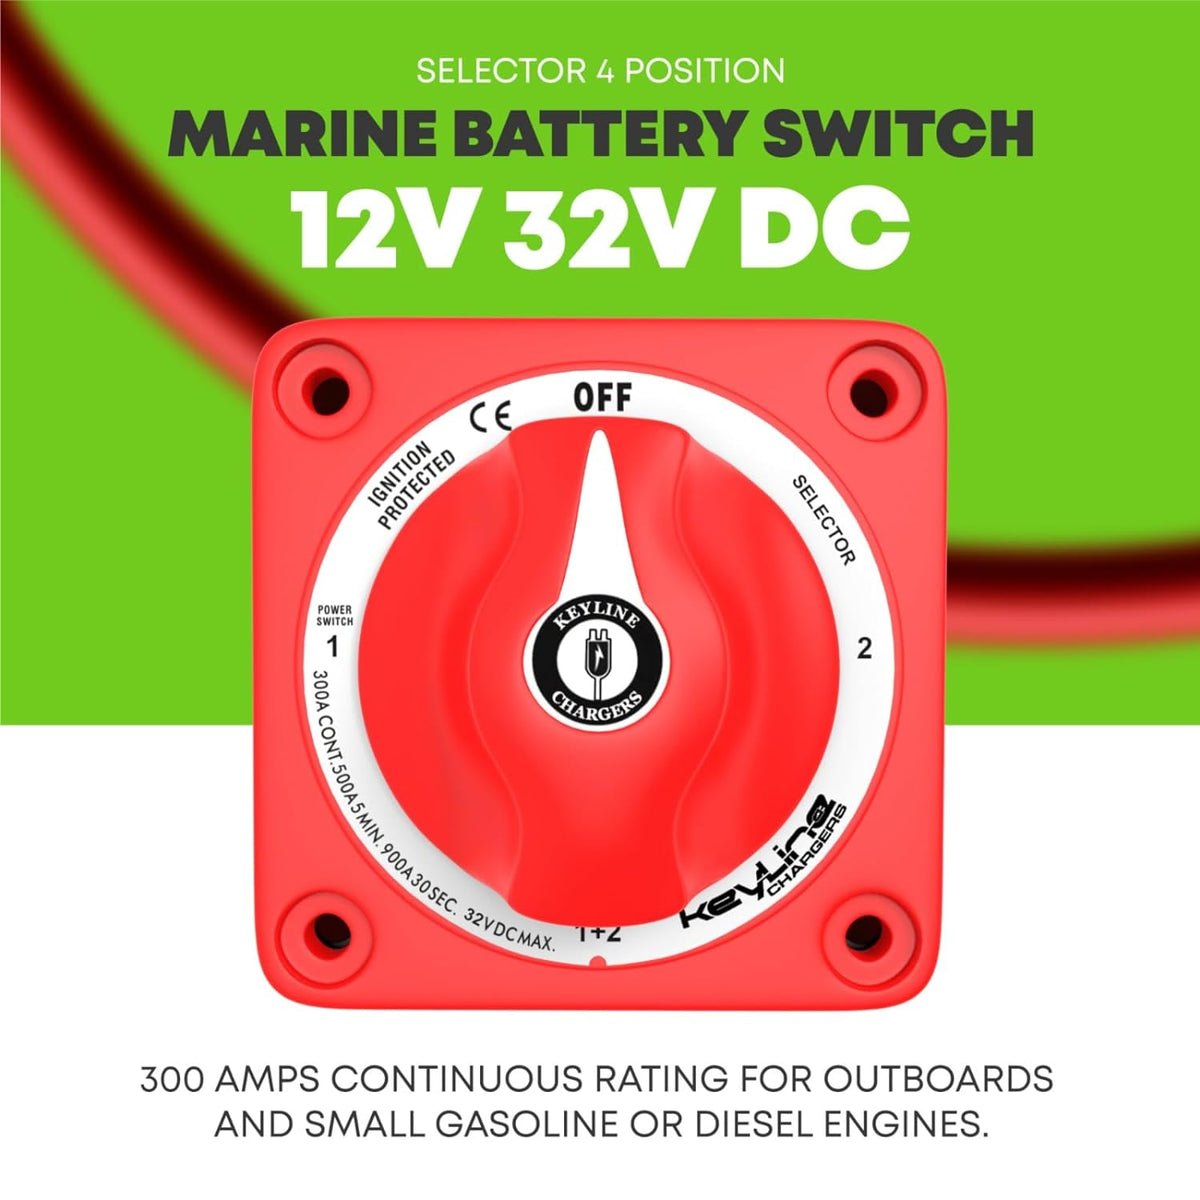 Marine Battery Switch | Battery Kill Switch 12V to 32V DC- Selector 4 Position 6007 M Series Boat Battery Switch by KeyLine Chargers